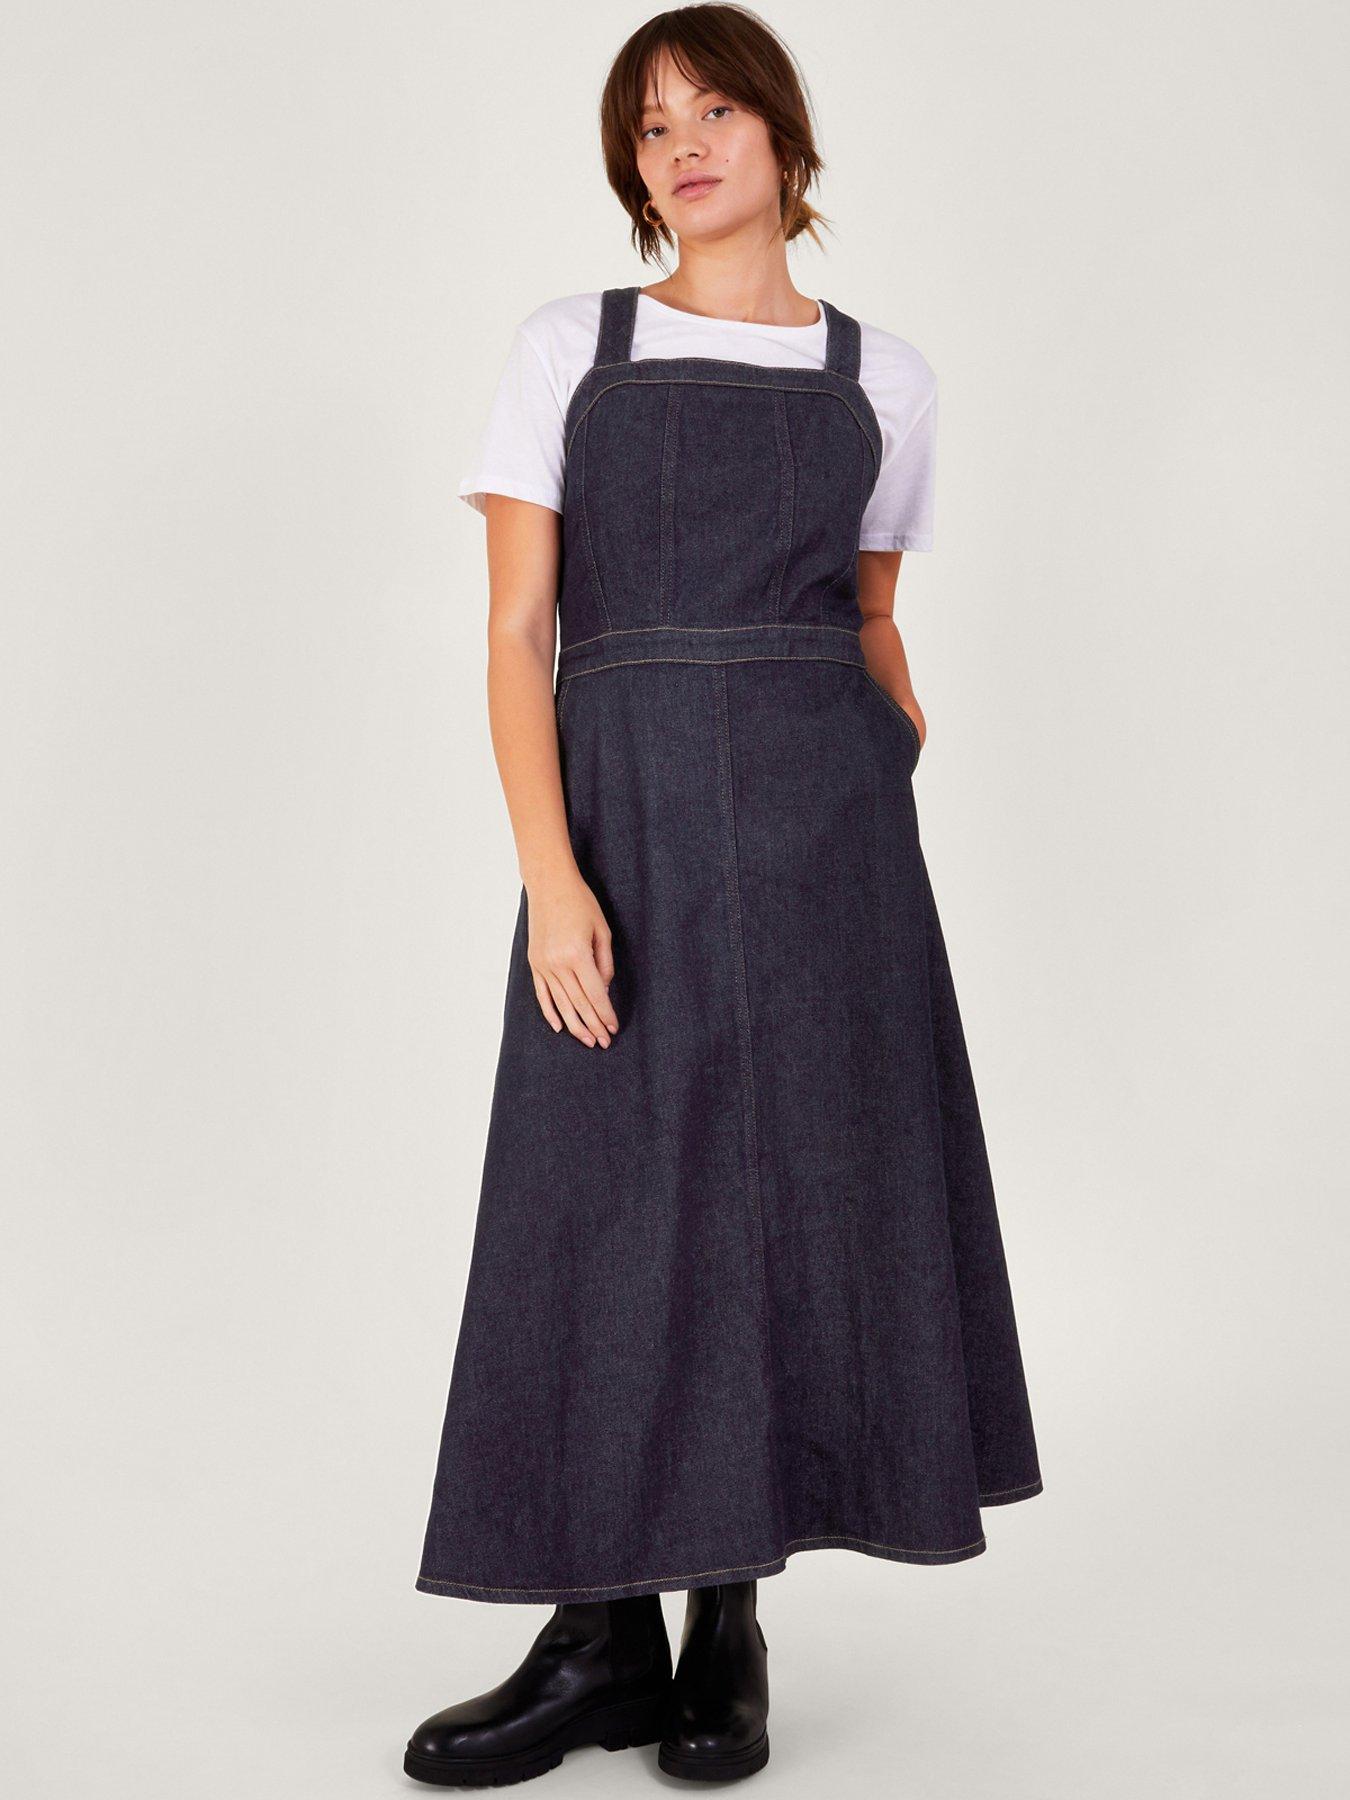 E-Book Dungarees / Pinafore dress sewing pattern & tutorial - english •  Make it Yours